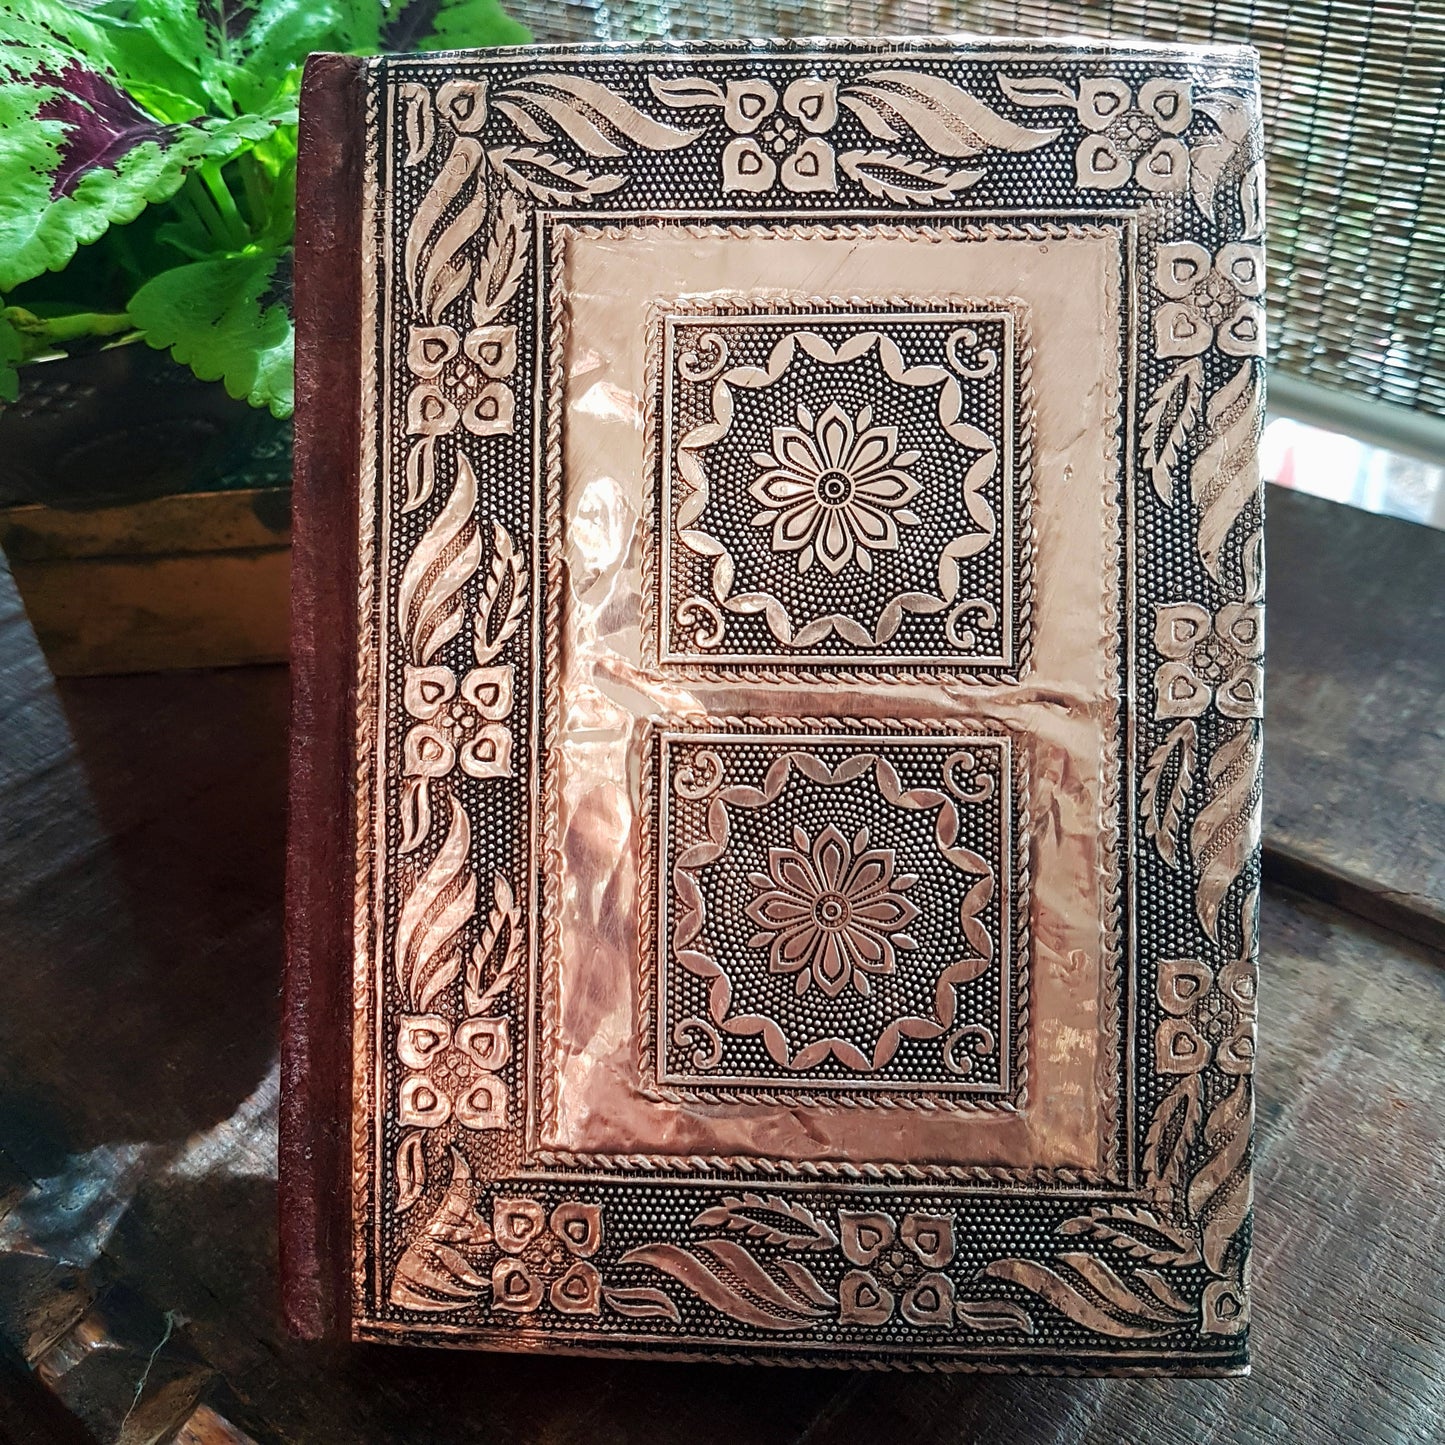 Medieval metal double rose sketchbook journal 5x7 inch. Antique embossed hardcover design. For drawing, journal, diary, writing.